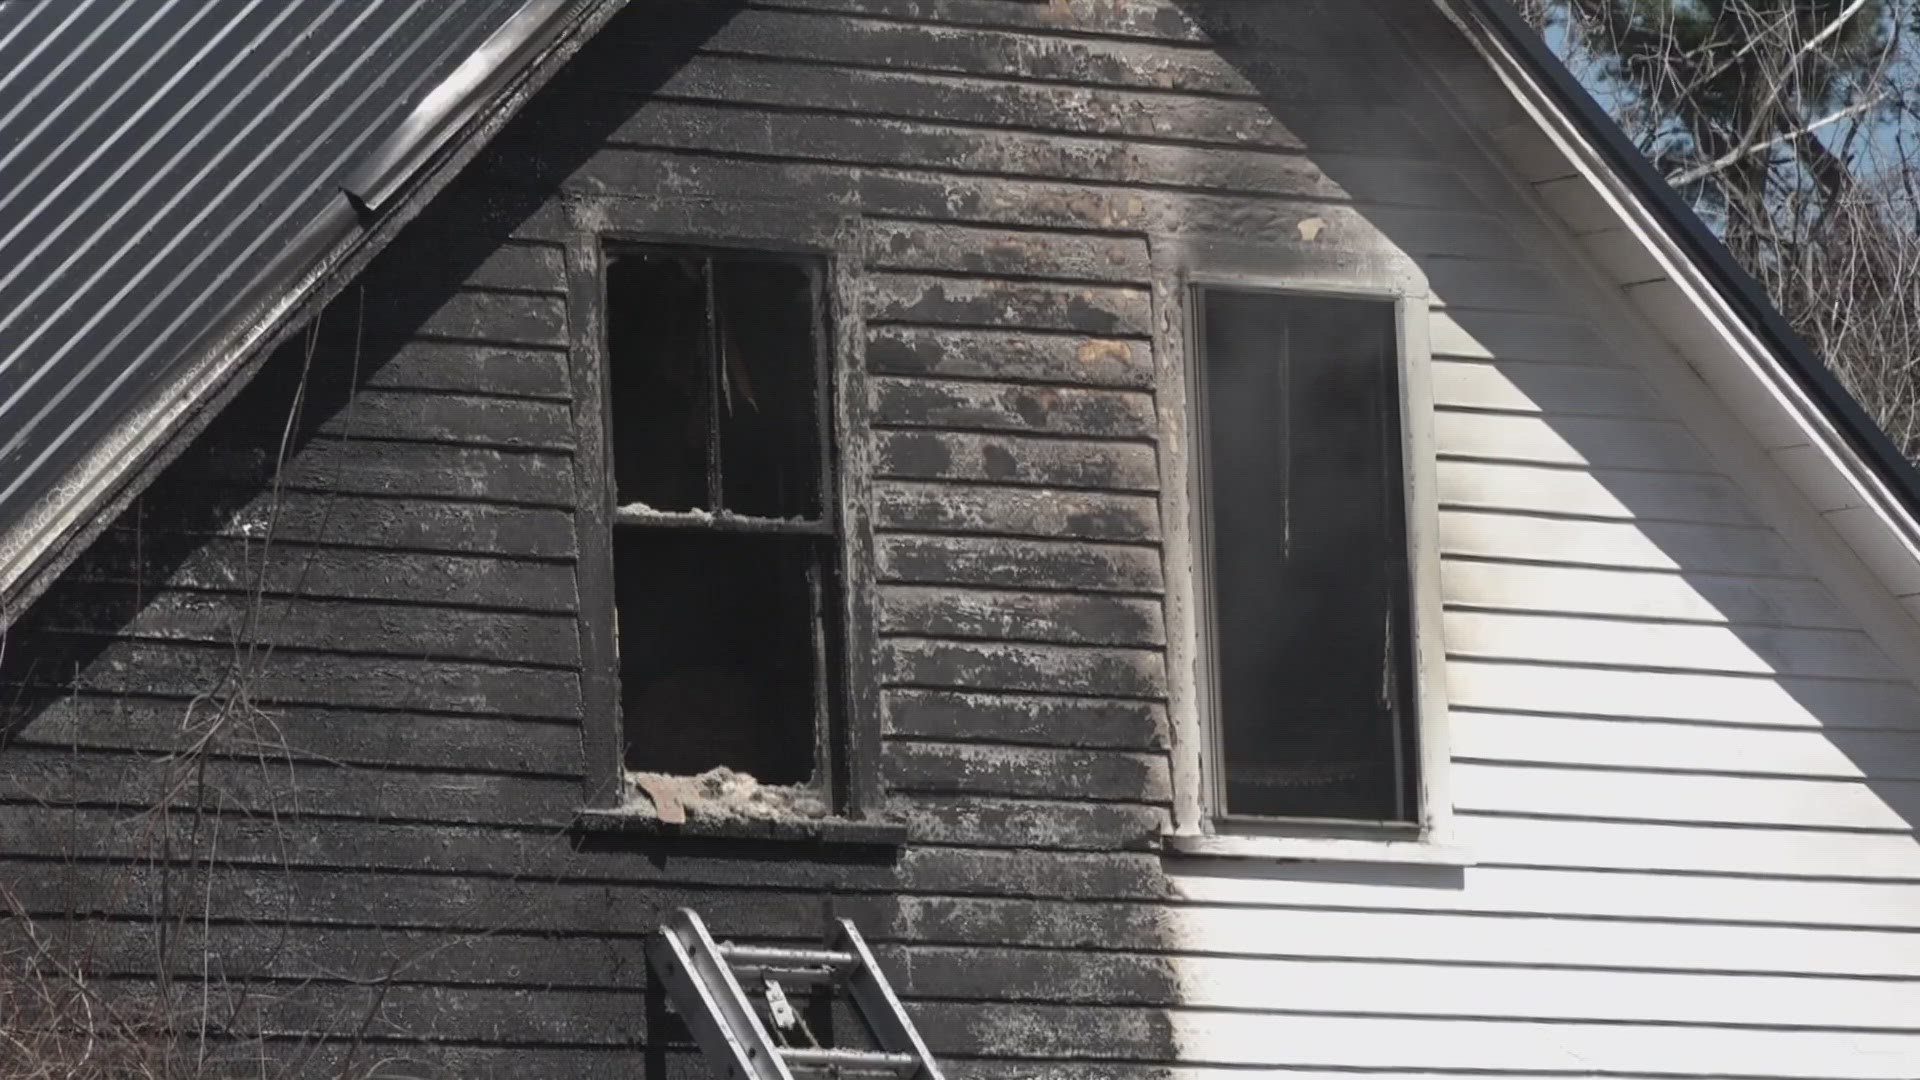 Fire officials said they received a report around noon Friday about an explosion. Crews from Bangor, Brewer, Orrington, Hampden, and Holden responded.